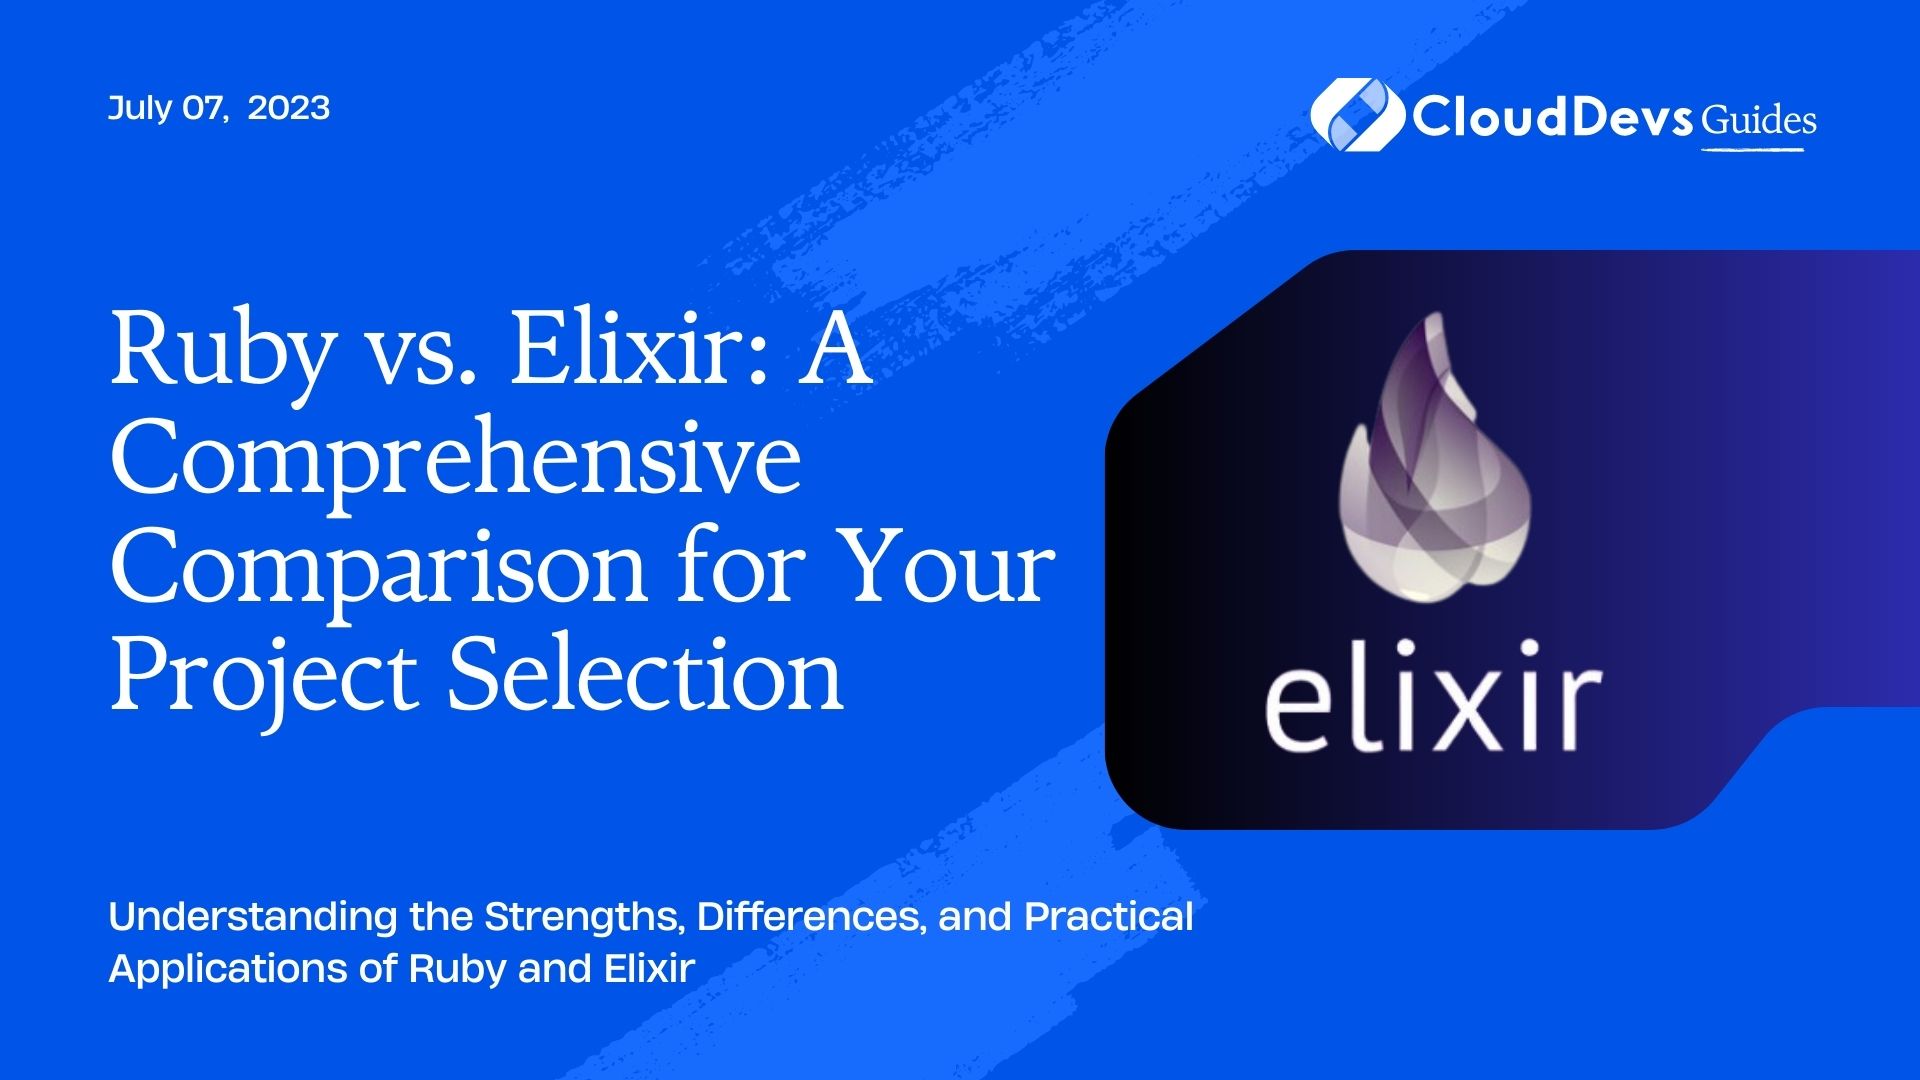 Ruby vs. Elixir: A Comprehensive Comparison for Your Project Selection